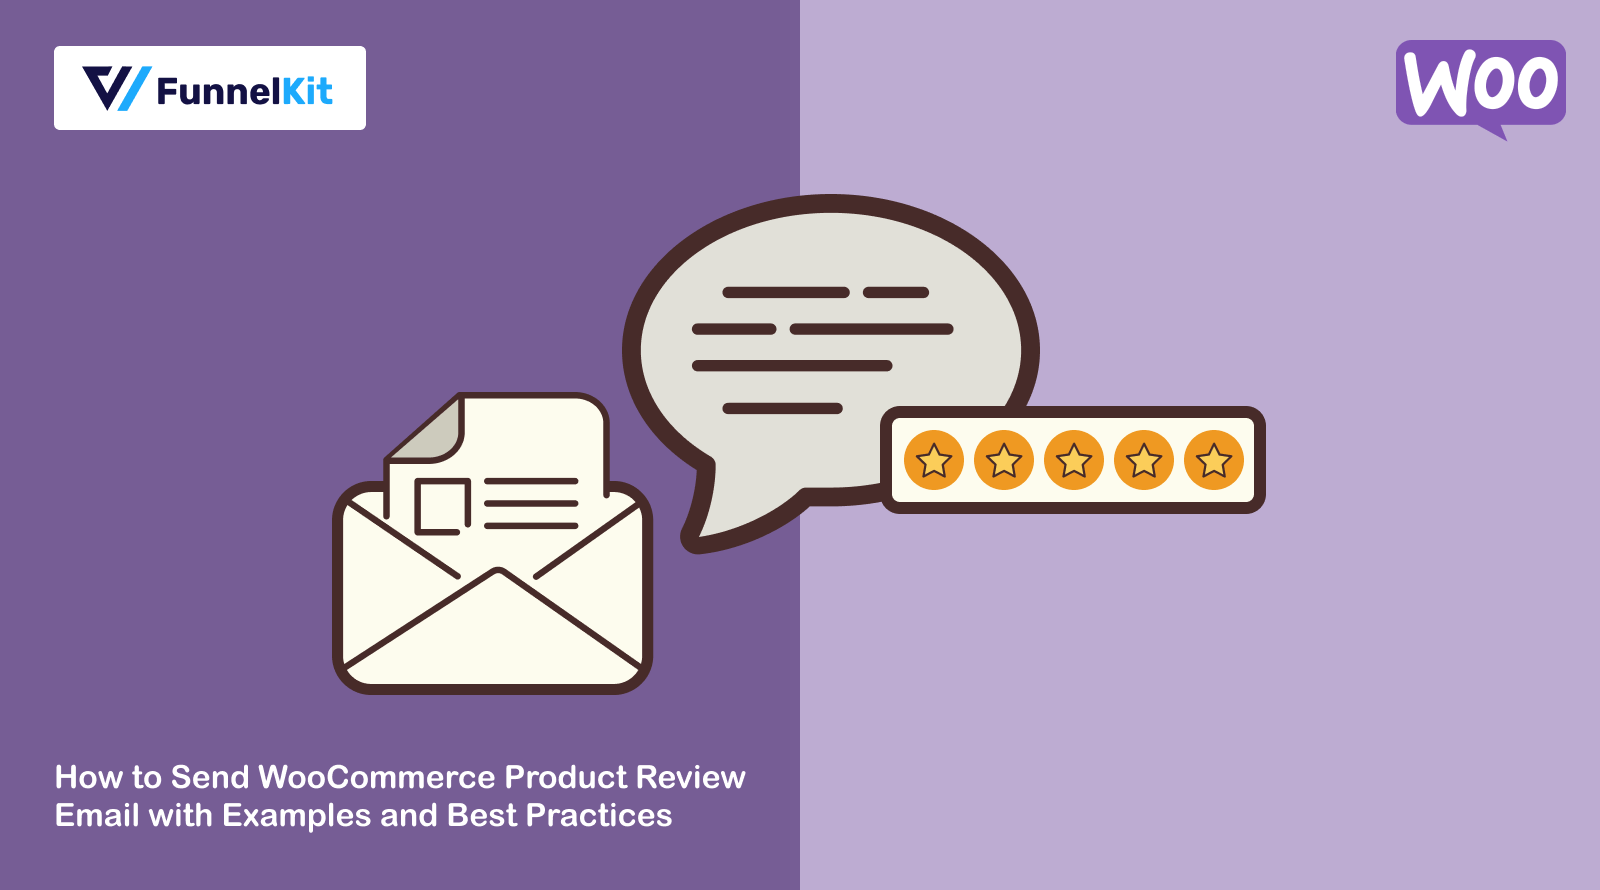 How to Send WooCommerce Product Review Email with Examples and Best Practices